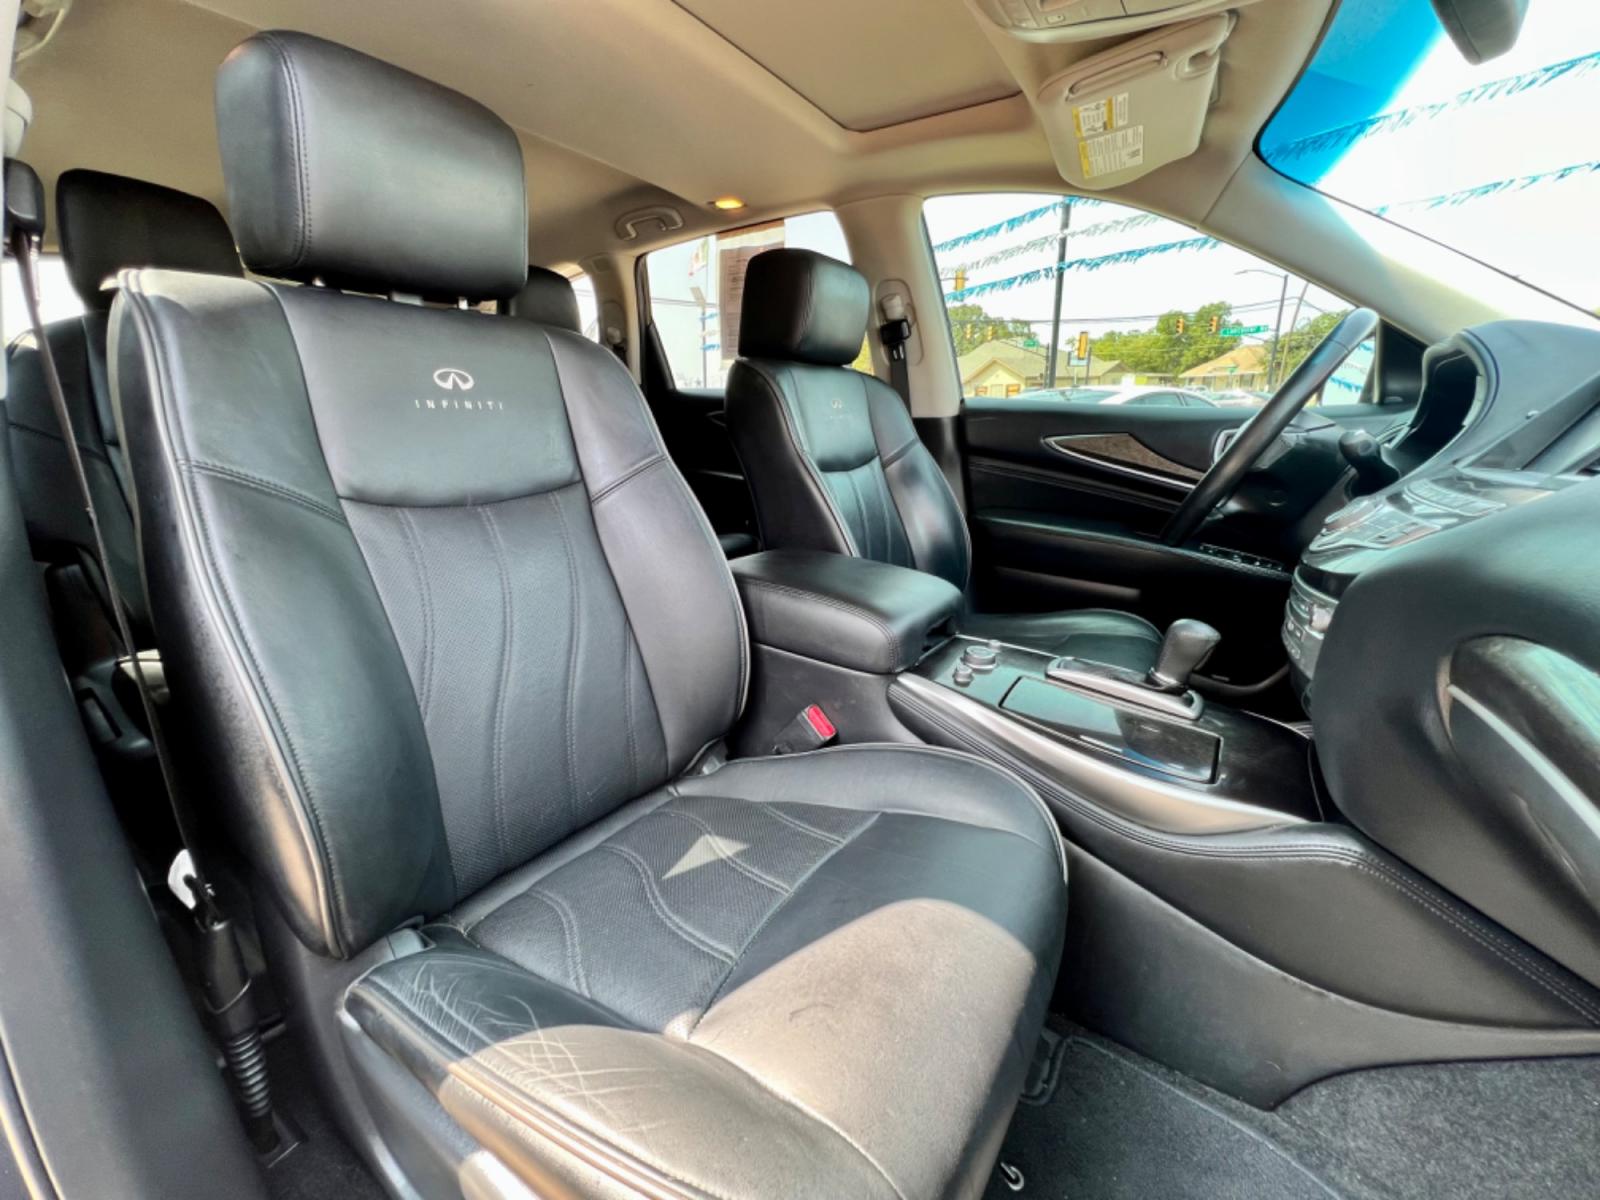 2014 GRAY INFINITI QX60 (5N1AL0MN1EC) , located at 5900 E. Lancaster Ave., Fort Worth, TX, 76112, (817) 457-5456, 0.000000, 0.000000 - This is a 2014 INFINITI QX60 4 DOOR SUV that is in excellent condition. There are no dents or scratches. The interior is clean with no rips or tears or stains. All power windows, door locks and seats. Ice cold AC for those hot Texas summer days. It is equipped with a CD player, AM/FM radio, AUX port - Photo #16